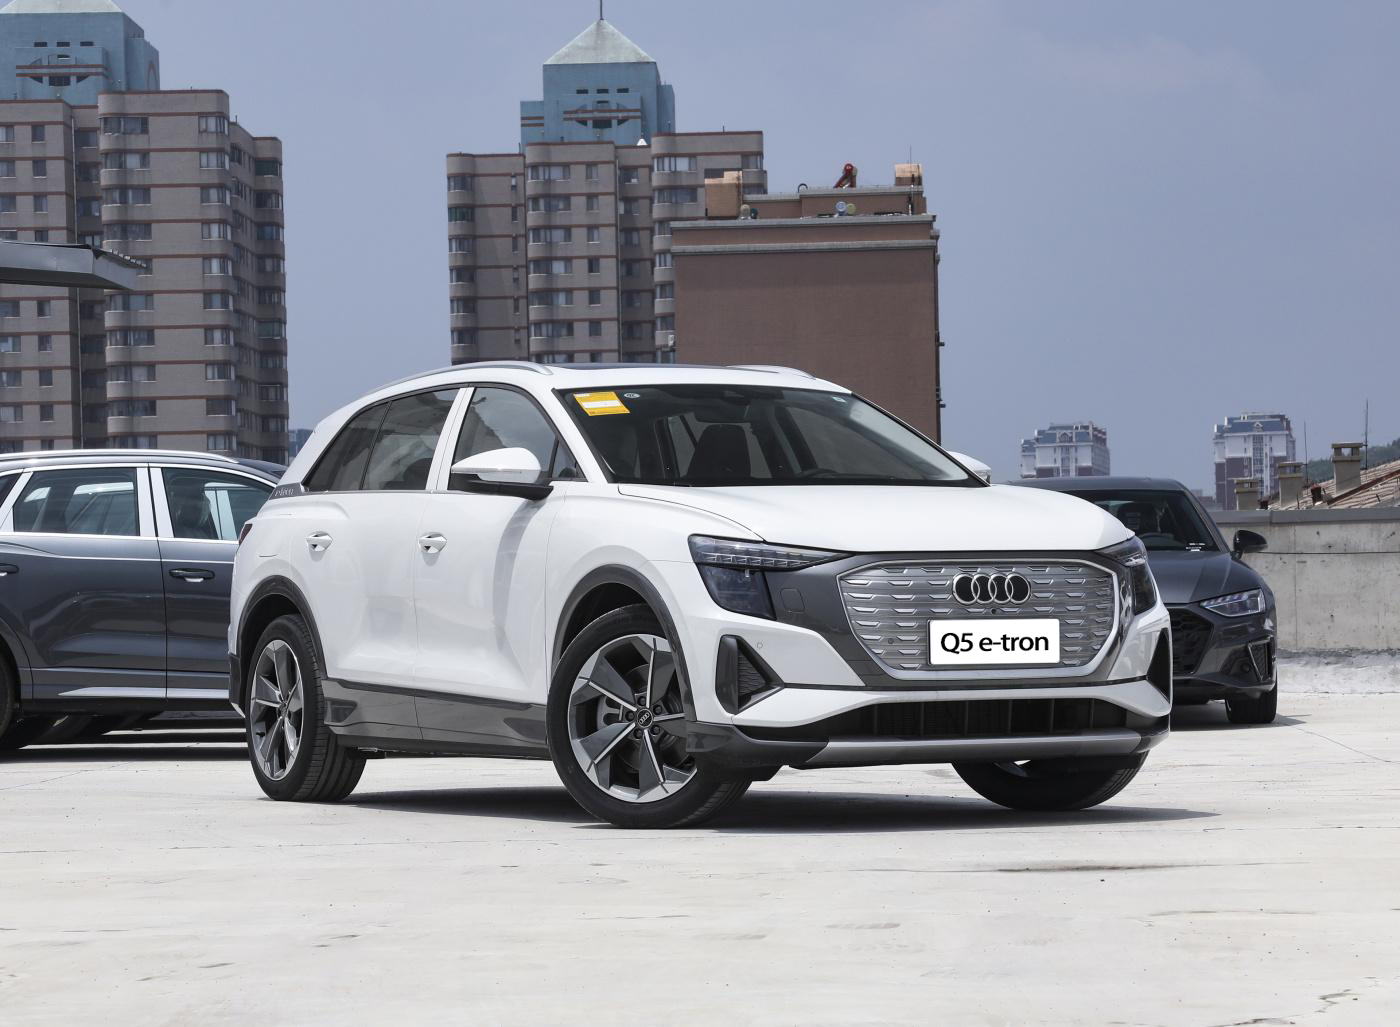 2024 Audi Q5 E-Tron Large Electric SUV Support Export Trade in China - Audi - 2